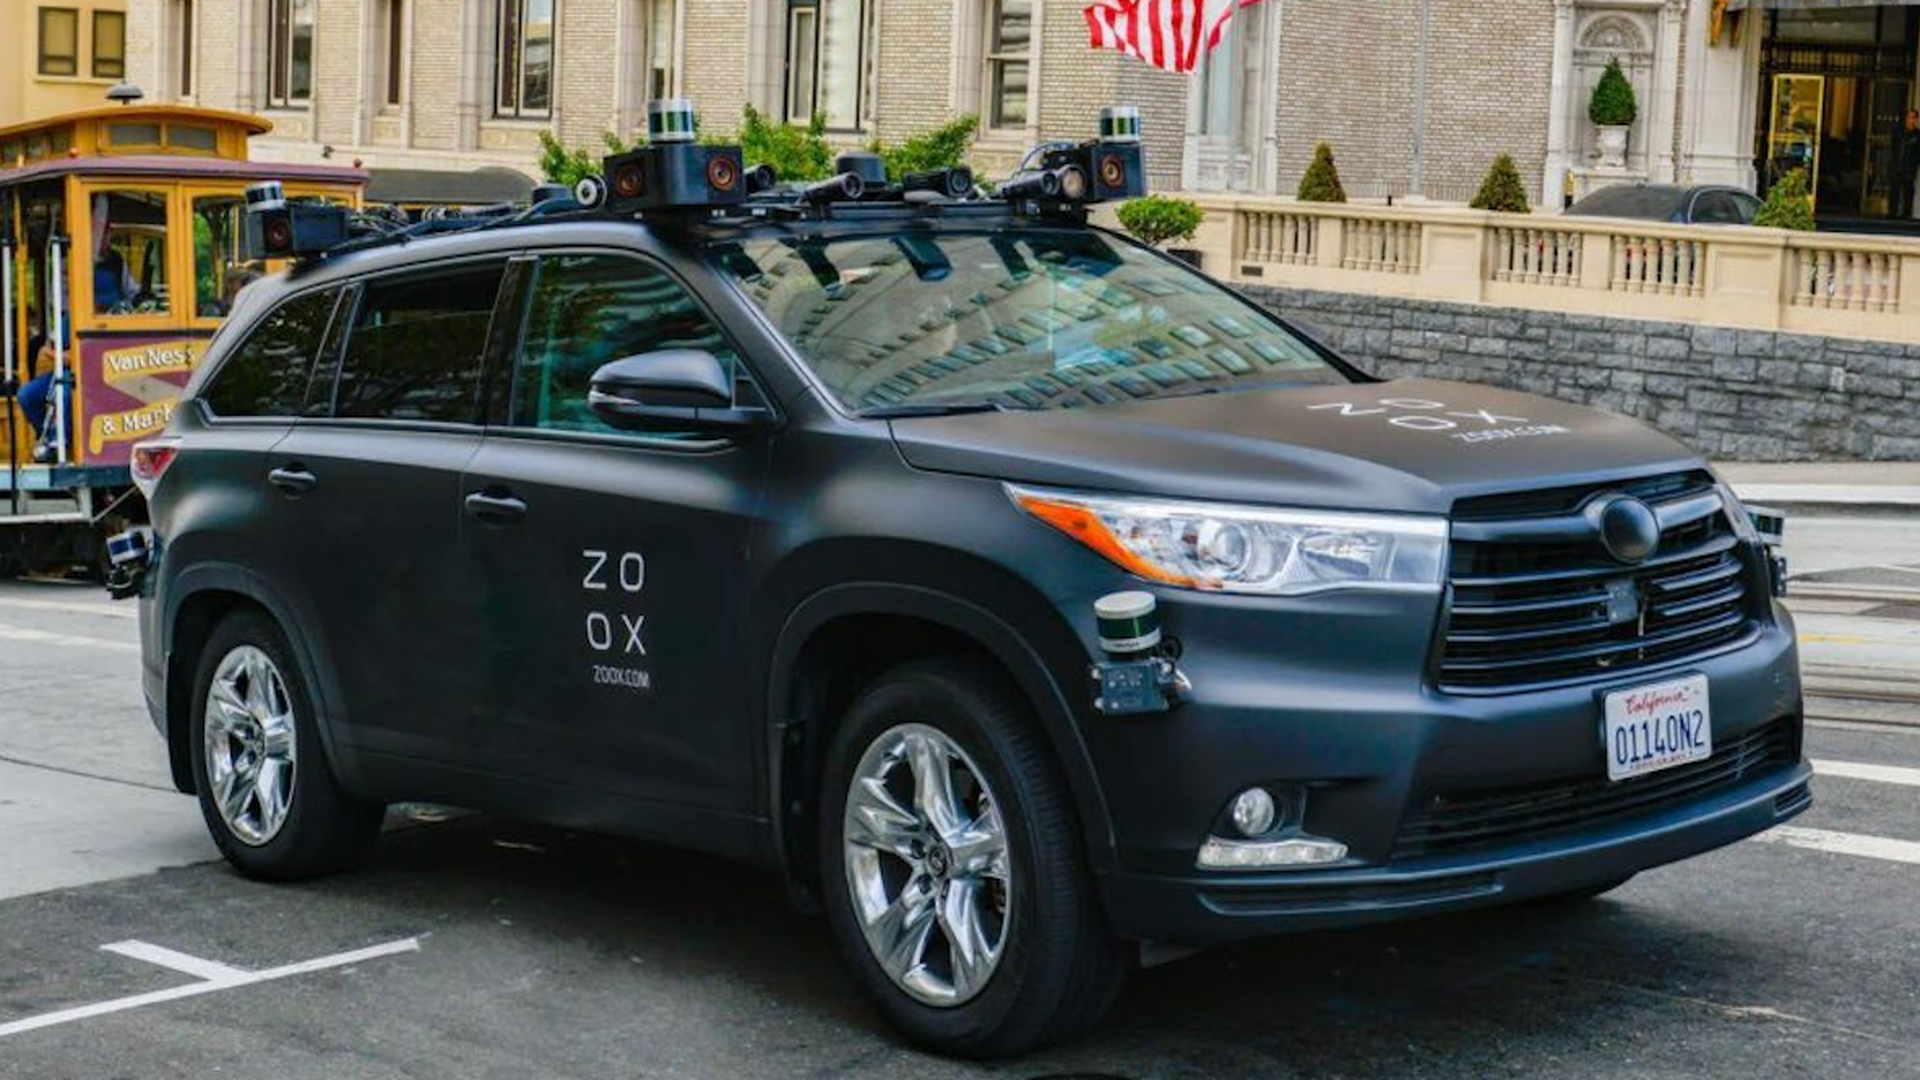 A Zoox self-driving test vehicle